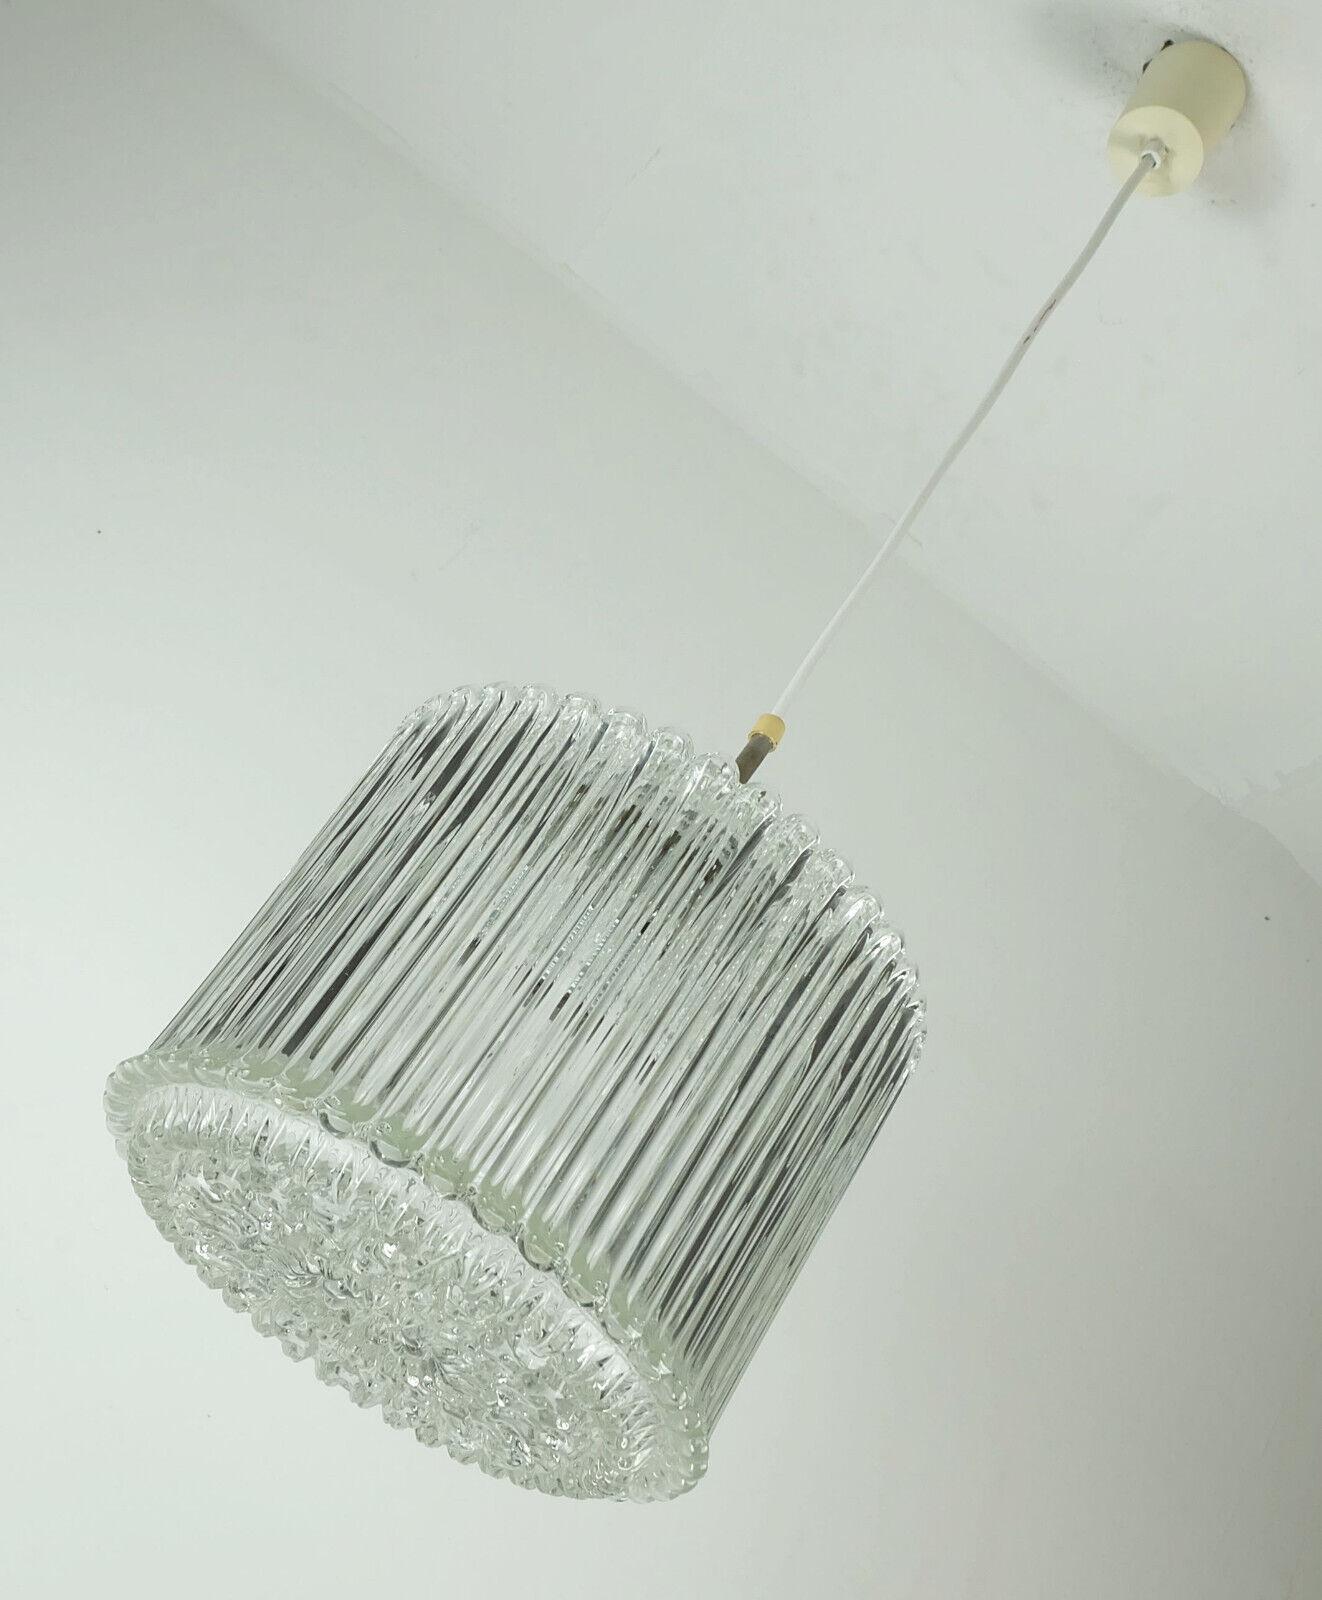 Amazing 1960s pendant light manufactured by Limburg, model no. P 911 a 1209. Heavy clear glass shade, with a ribbed surface structure on the outside, with a “bubble” surface at the top and bottom. Chrome plated metal bracket. White electric wire and